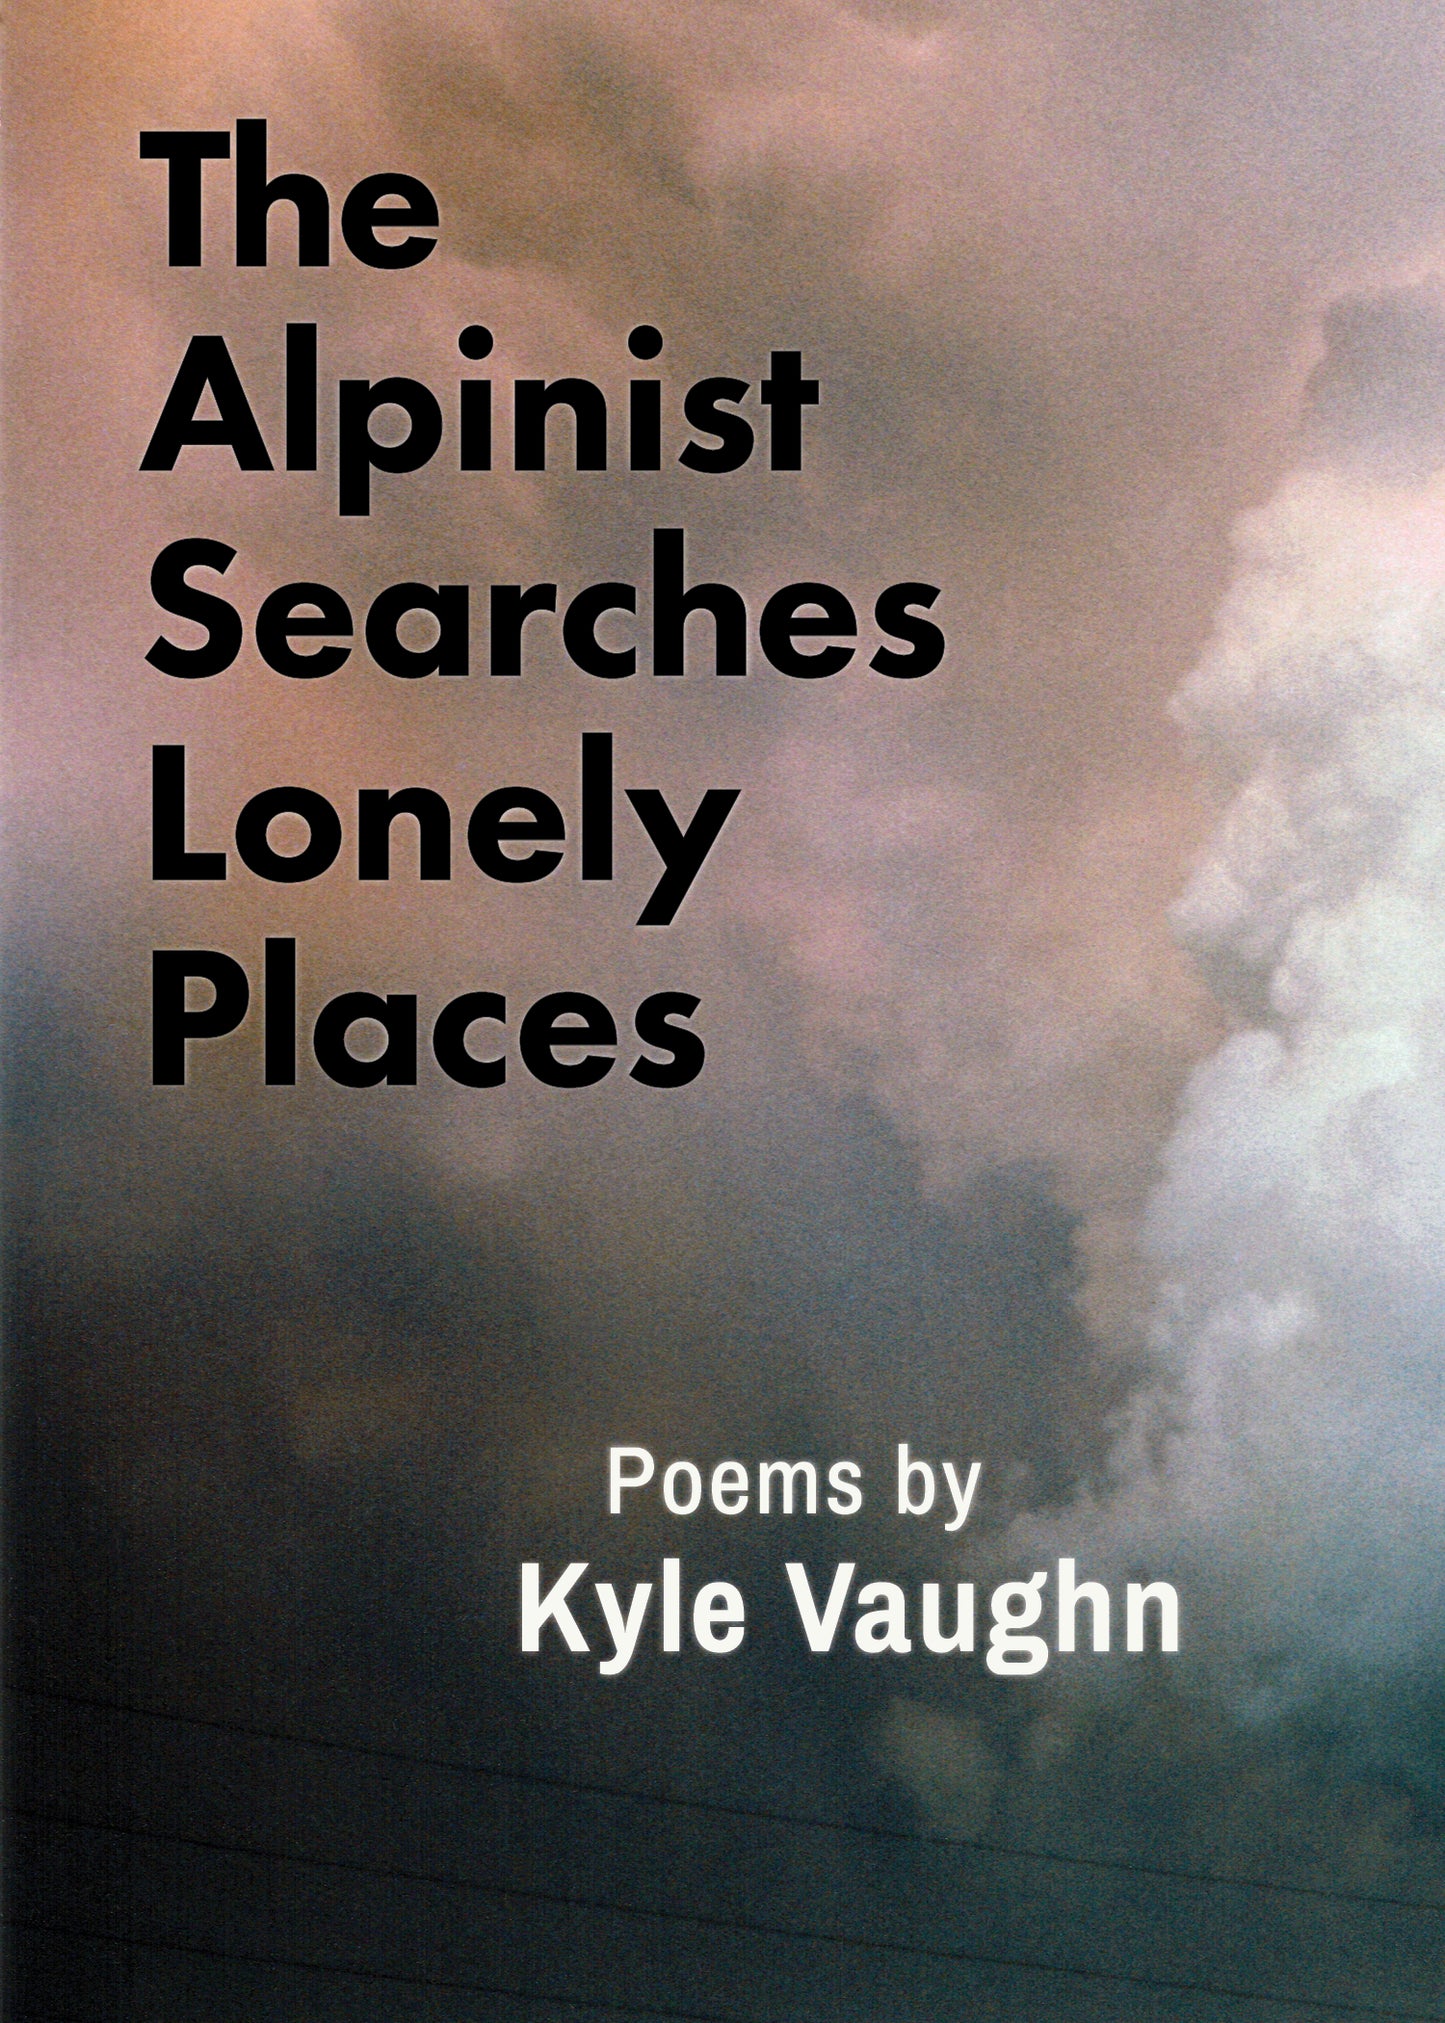 The Alpinist Searches Lonely Places